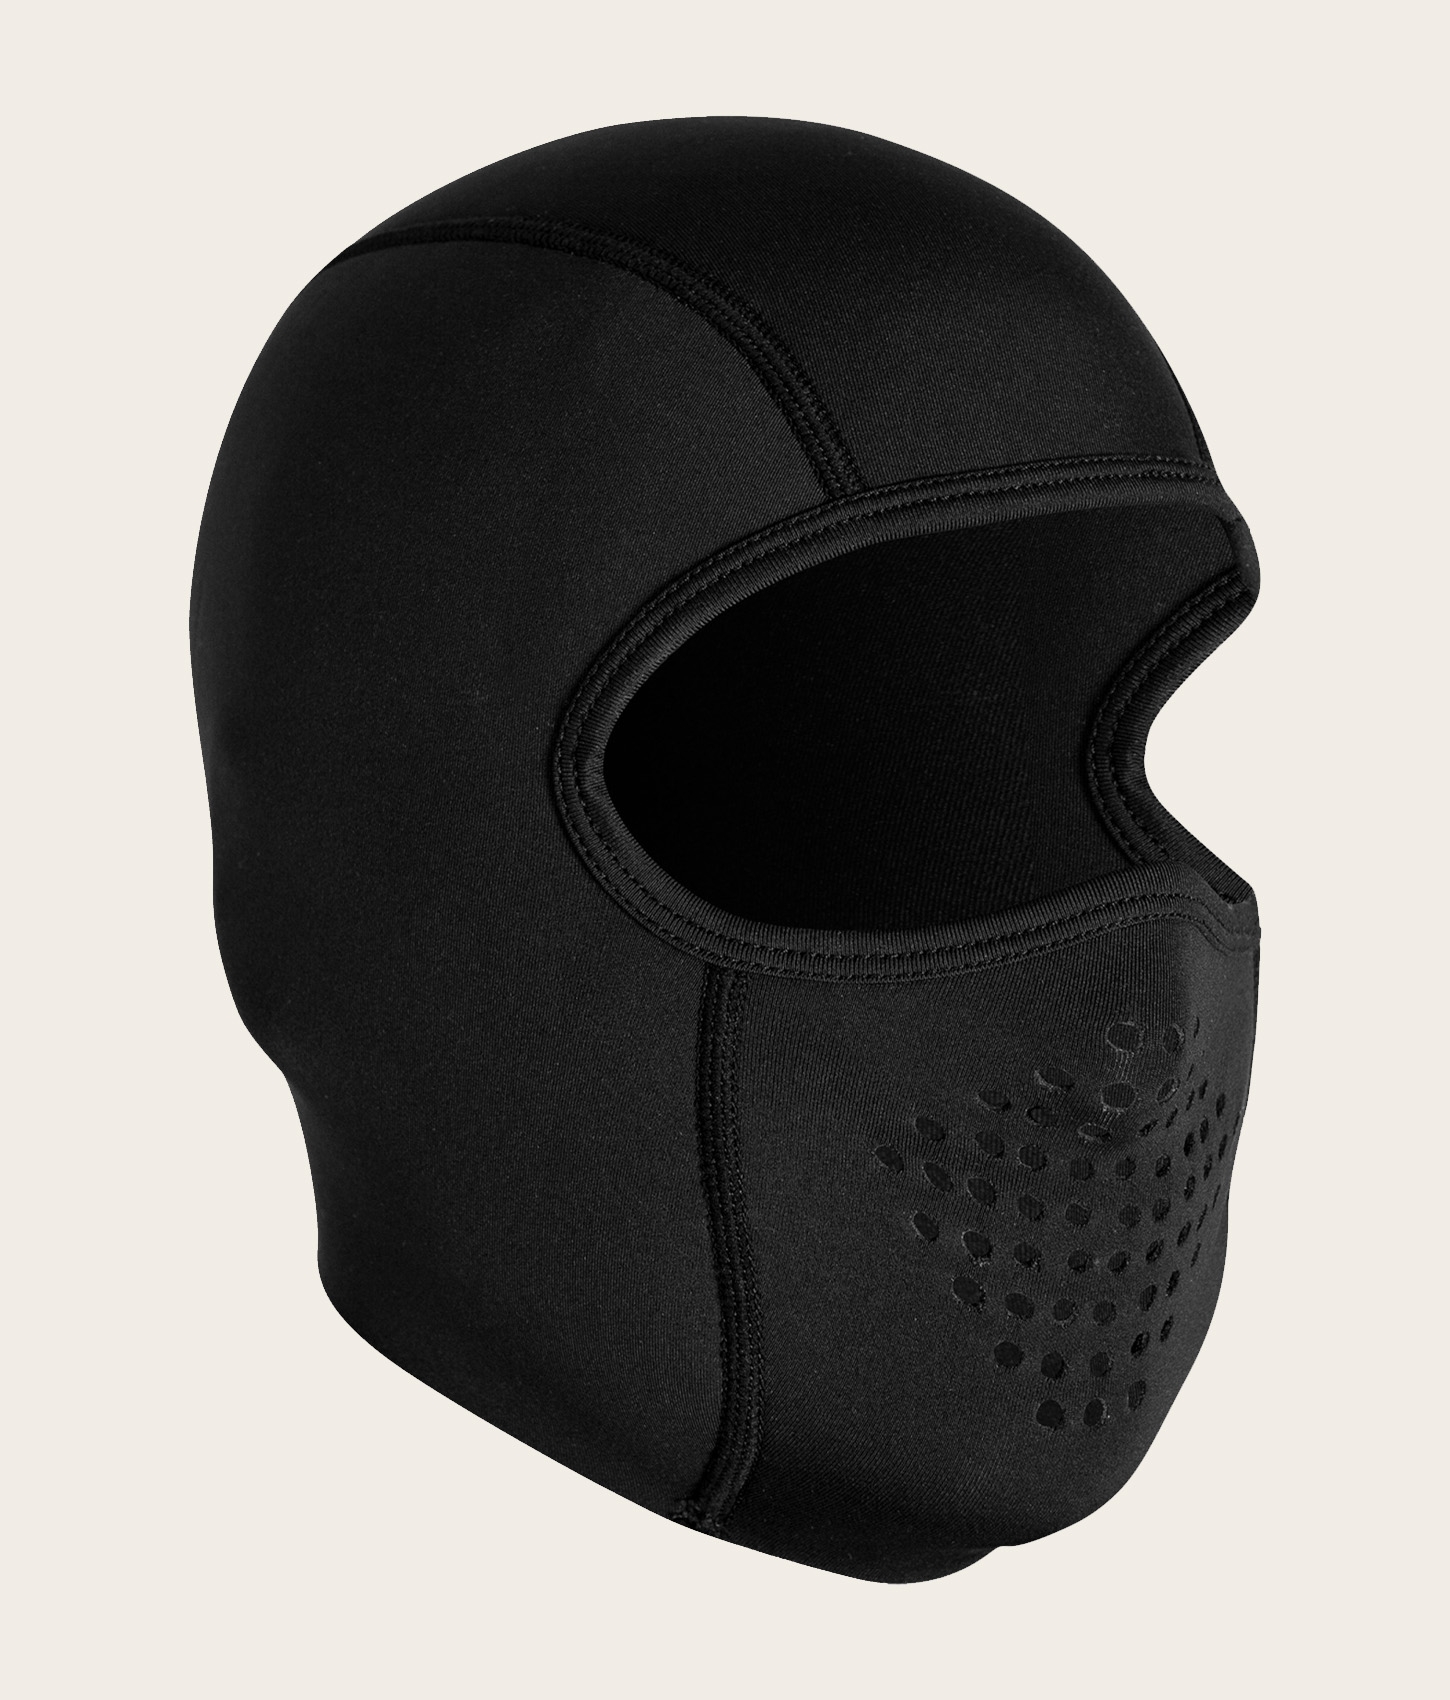 O'Neill Epic 2mm Gloves Black Unisex Formula Polygrip Double lined Hoodie Cap 